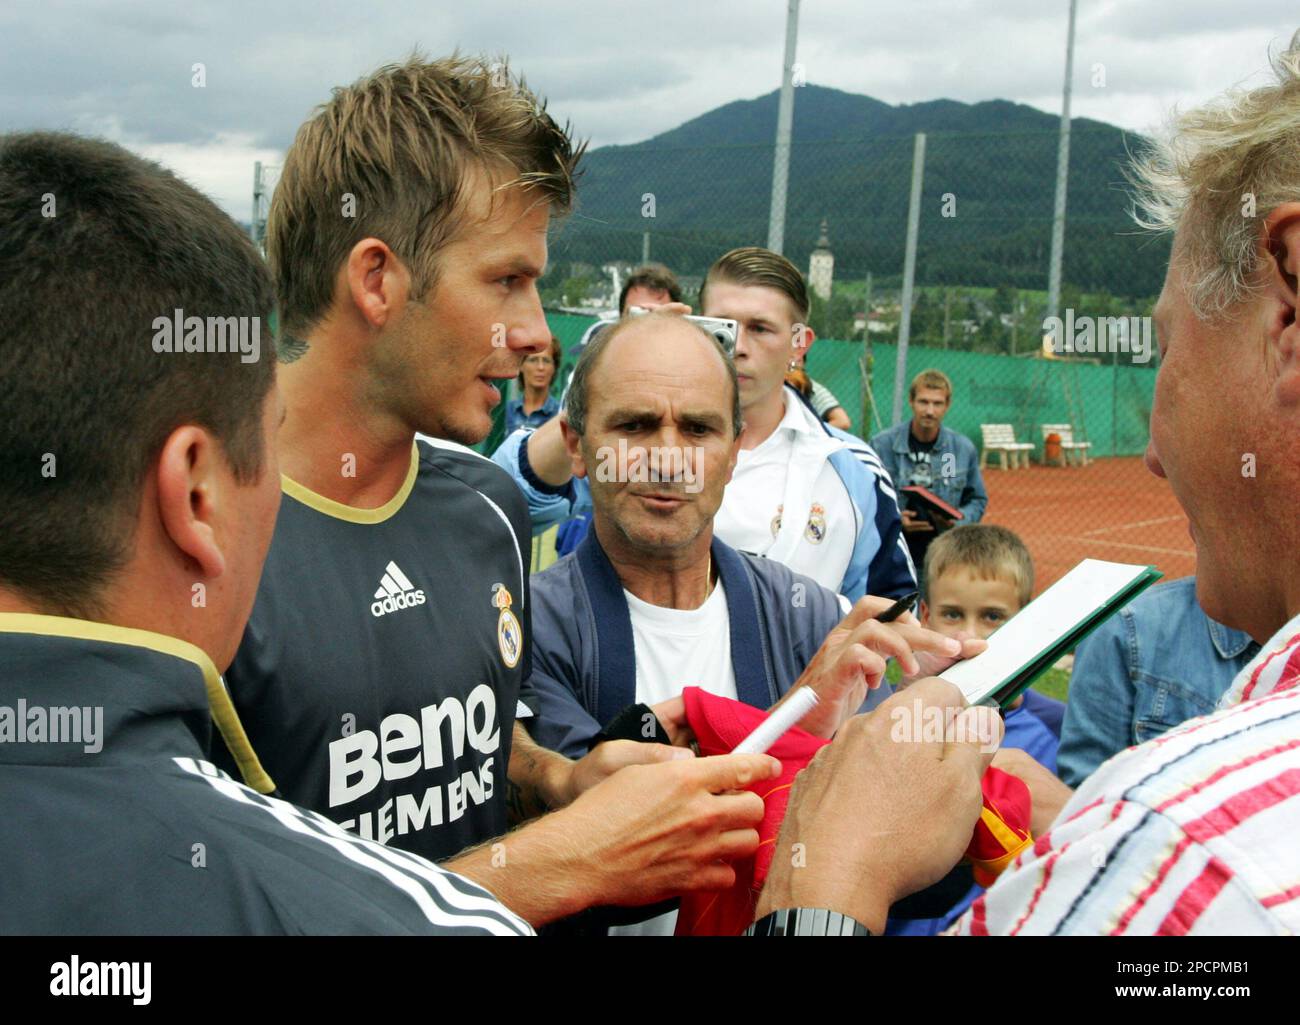 Real Madrid's David Beckham, left, signs autographs prior to a friendly soccer match between Real Madrid and the British soccer club Fulham, on Saturday, July 29, 2006, in Irdning, Austria. (AP Photo/Markus Leodolter) Banque D'Images